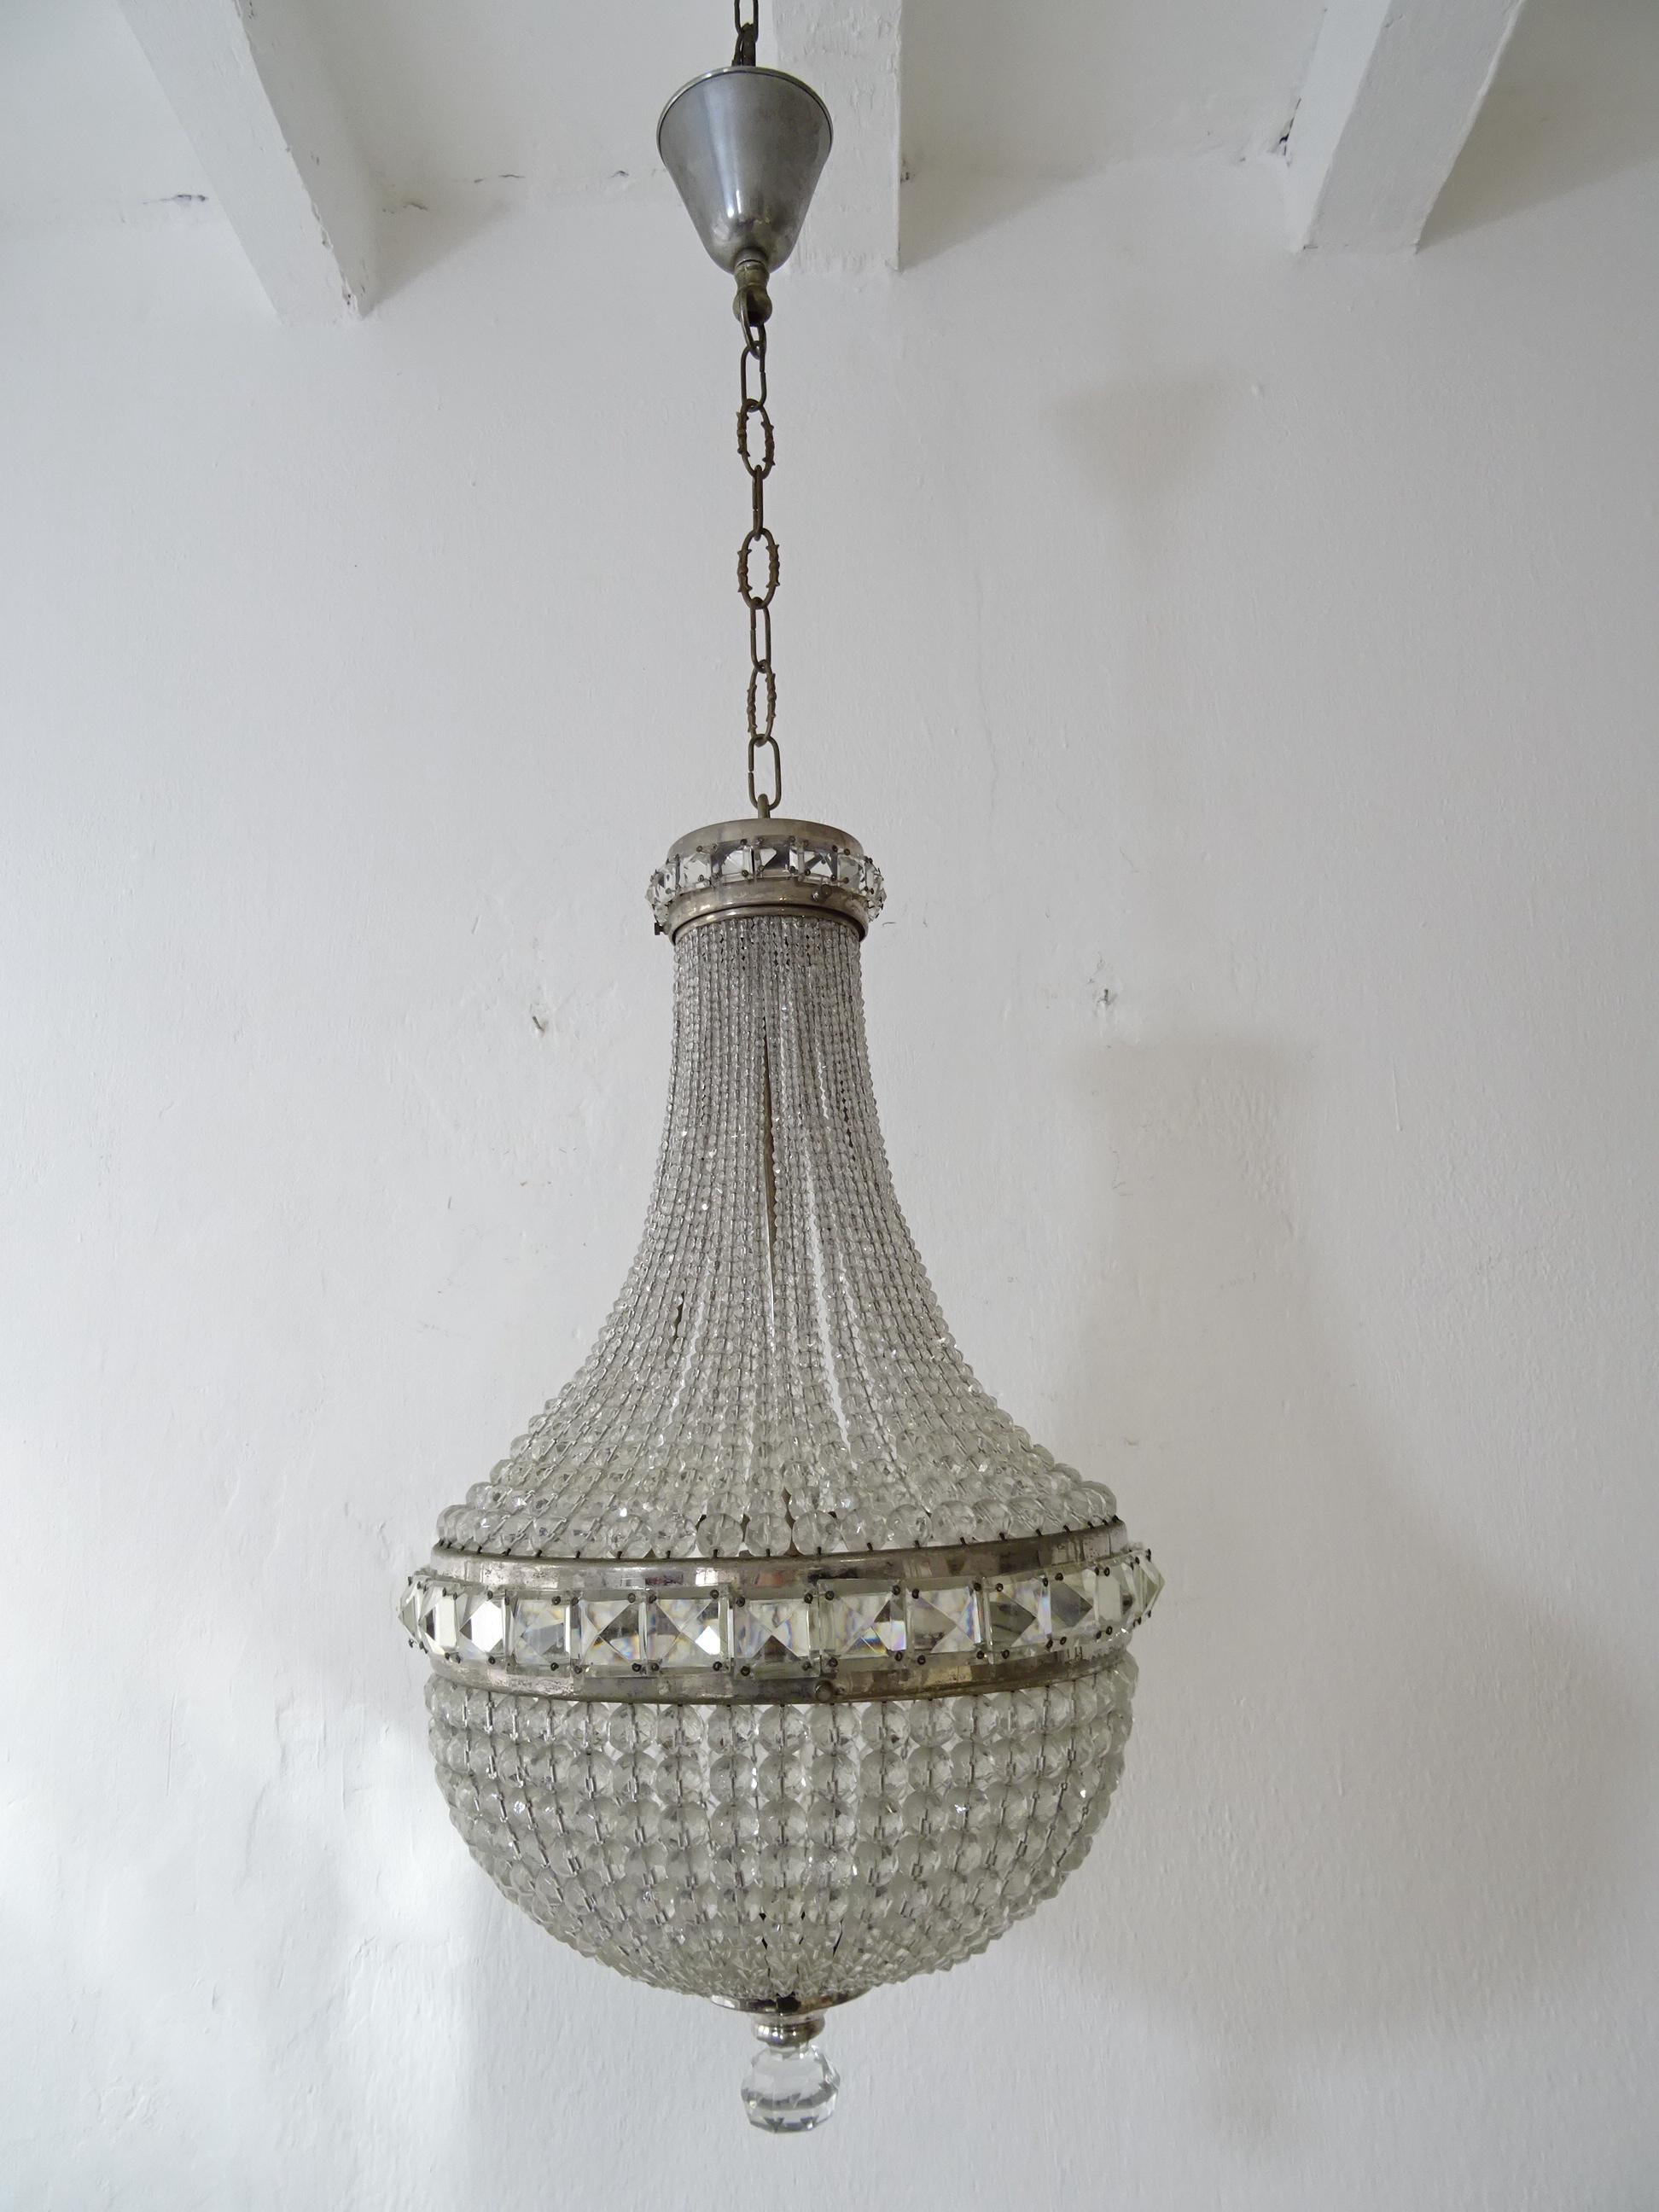 Housing one light, will be rewired and ready to hang. We use certified UL US sockets and appropriate sockets for all other countries. Strands and strands of crystal beads from tiny to big with crystal finial on bottom. Also adorning rare square